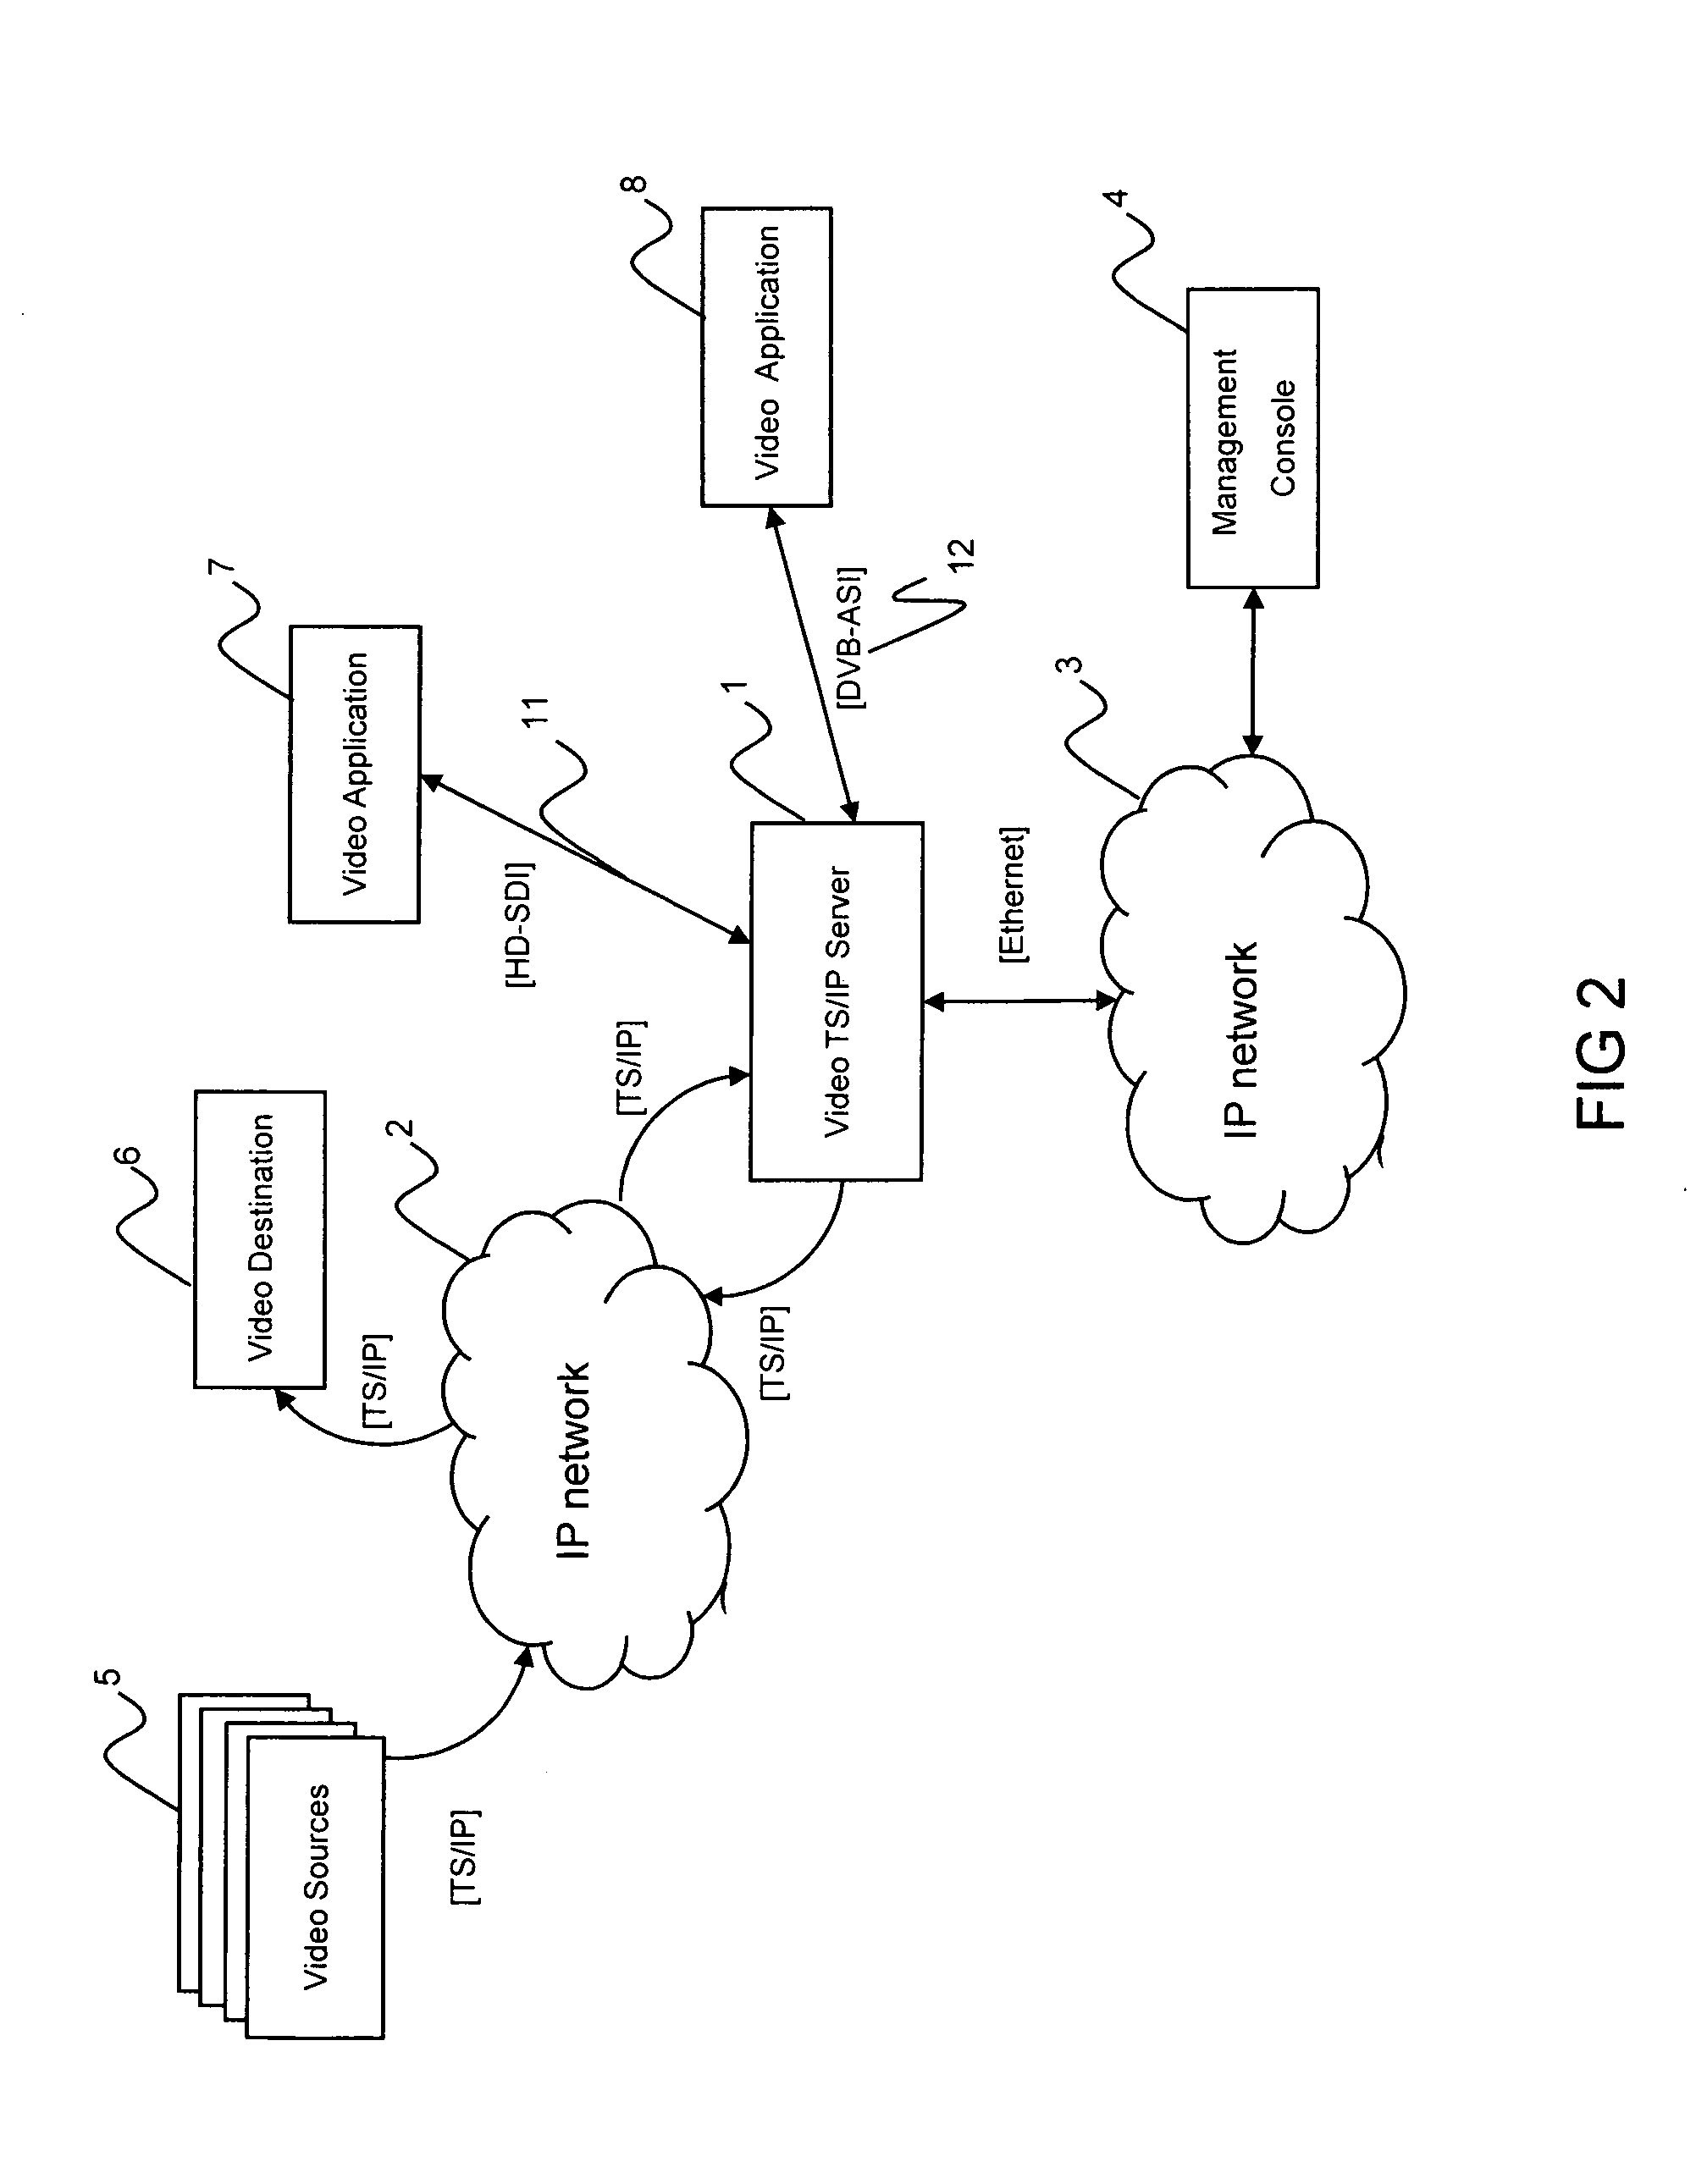 Switchable multi-channel data transcoding and transrating system